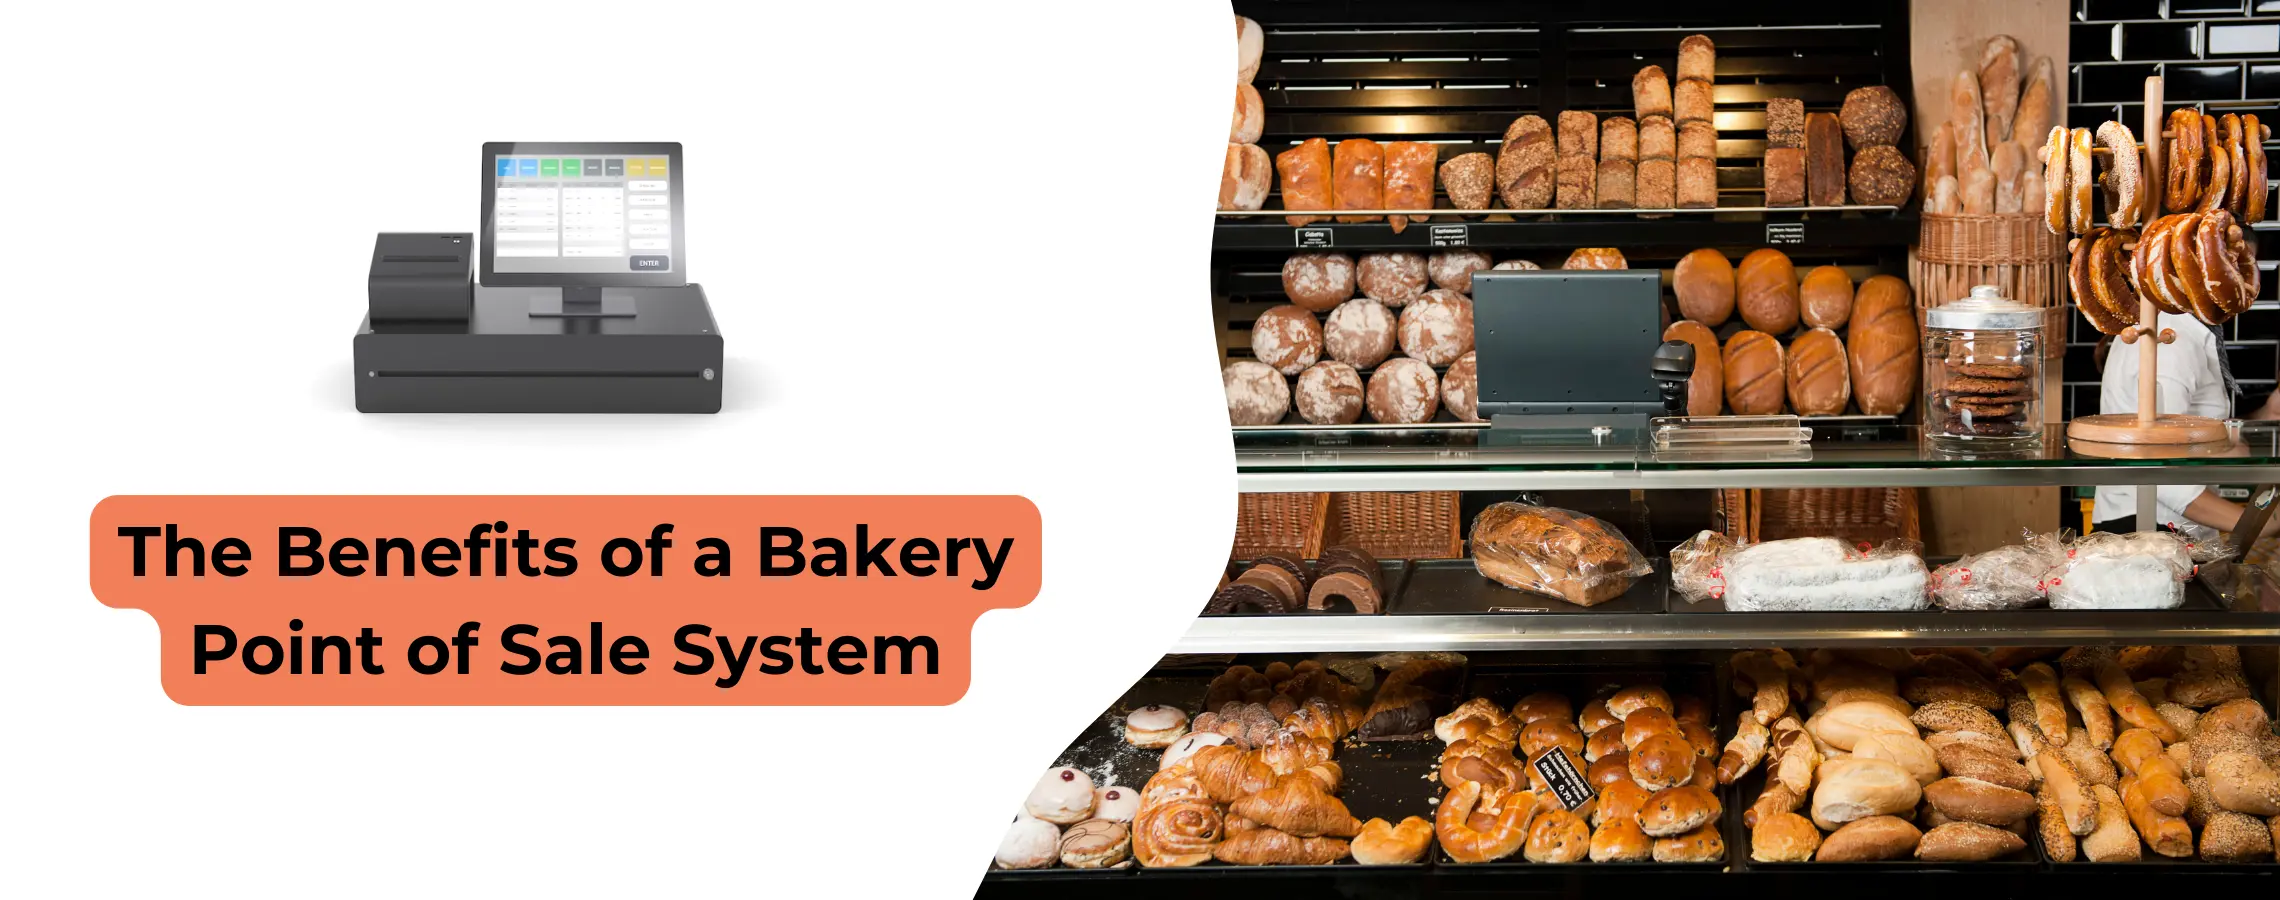 The Benefits of a Bakery Point of Sale System